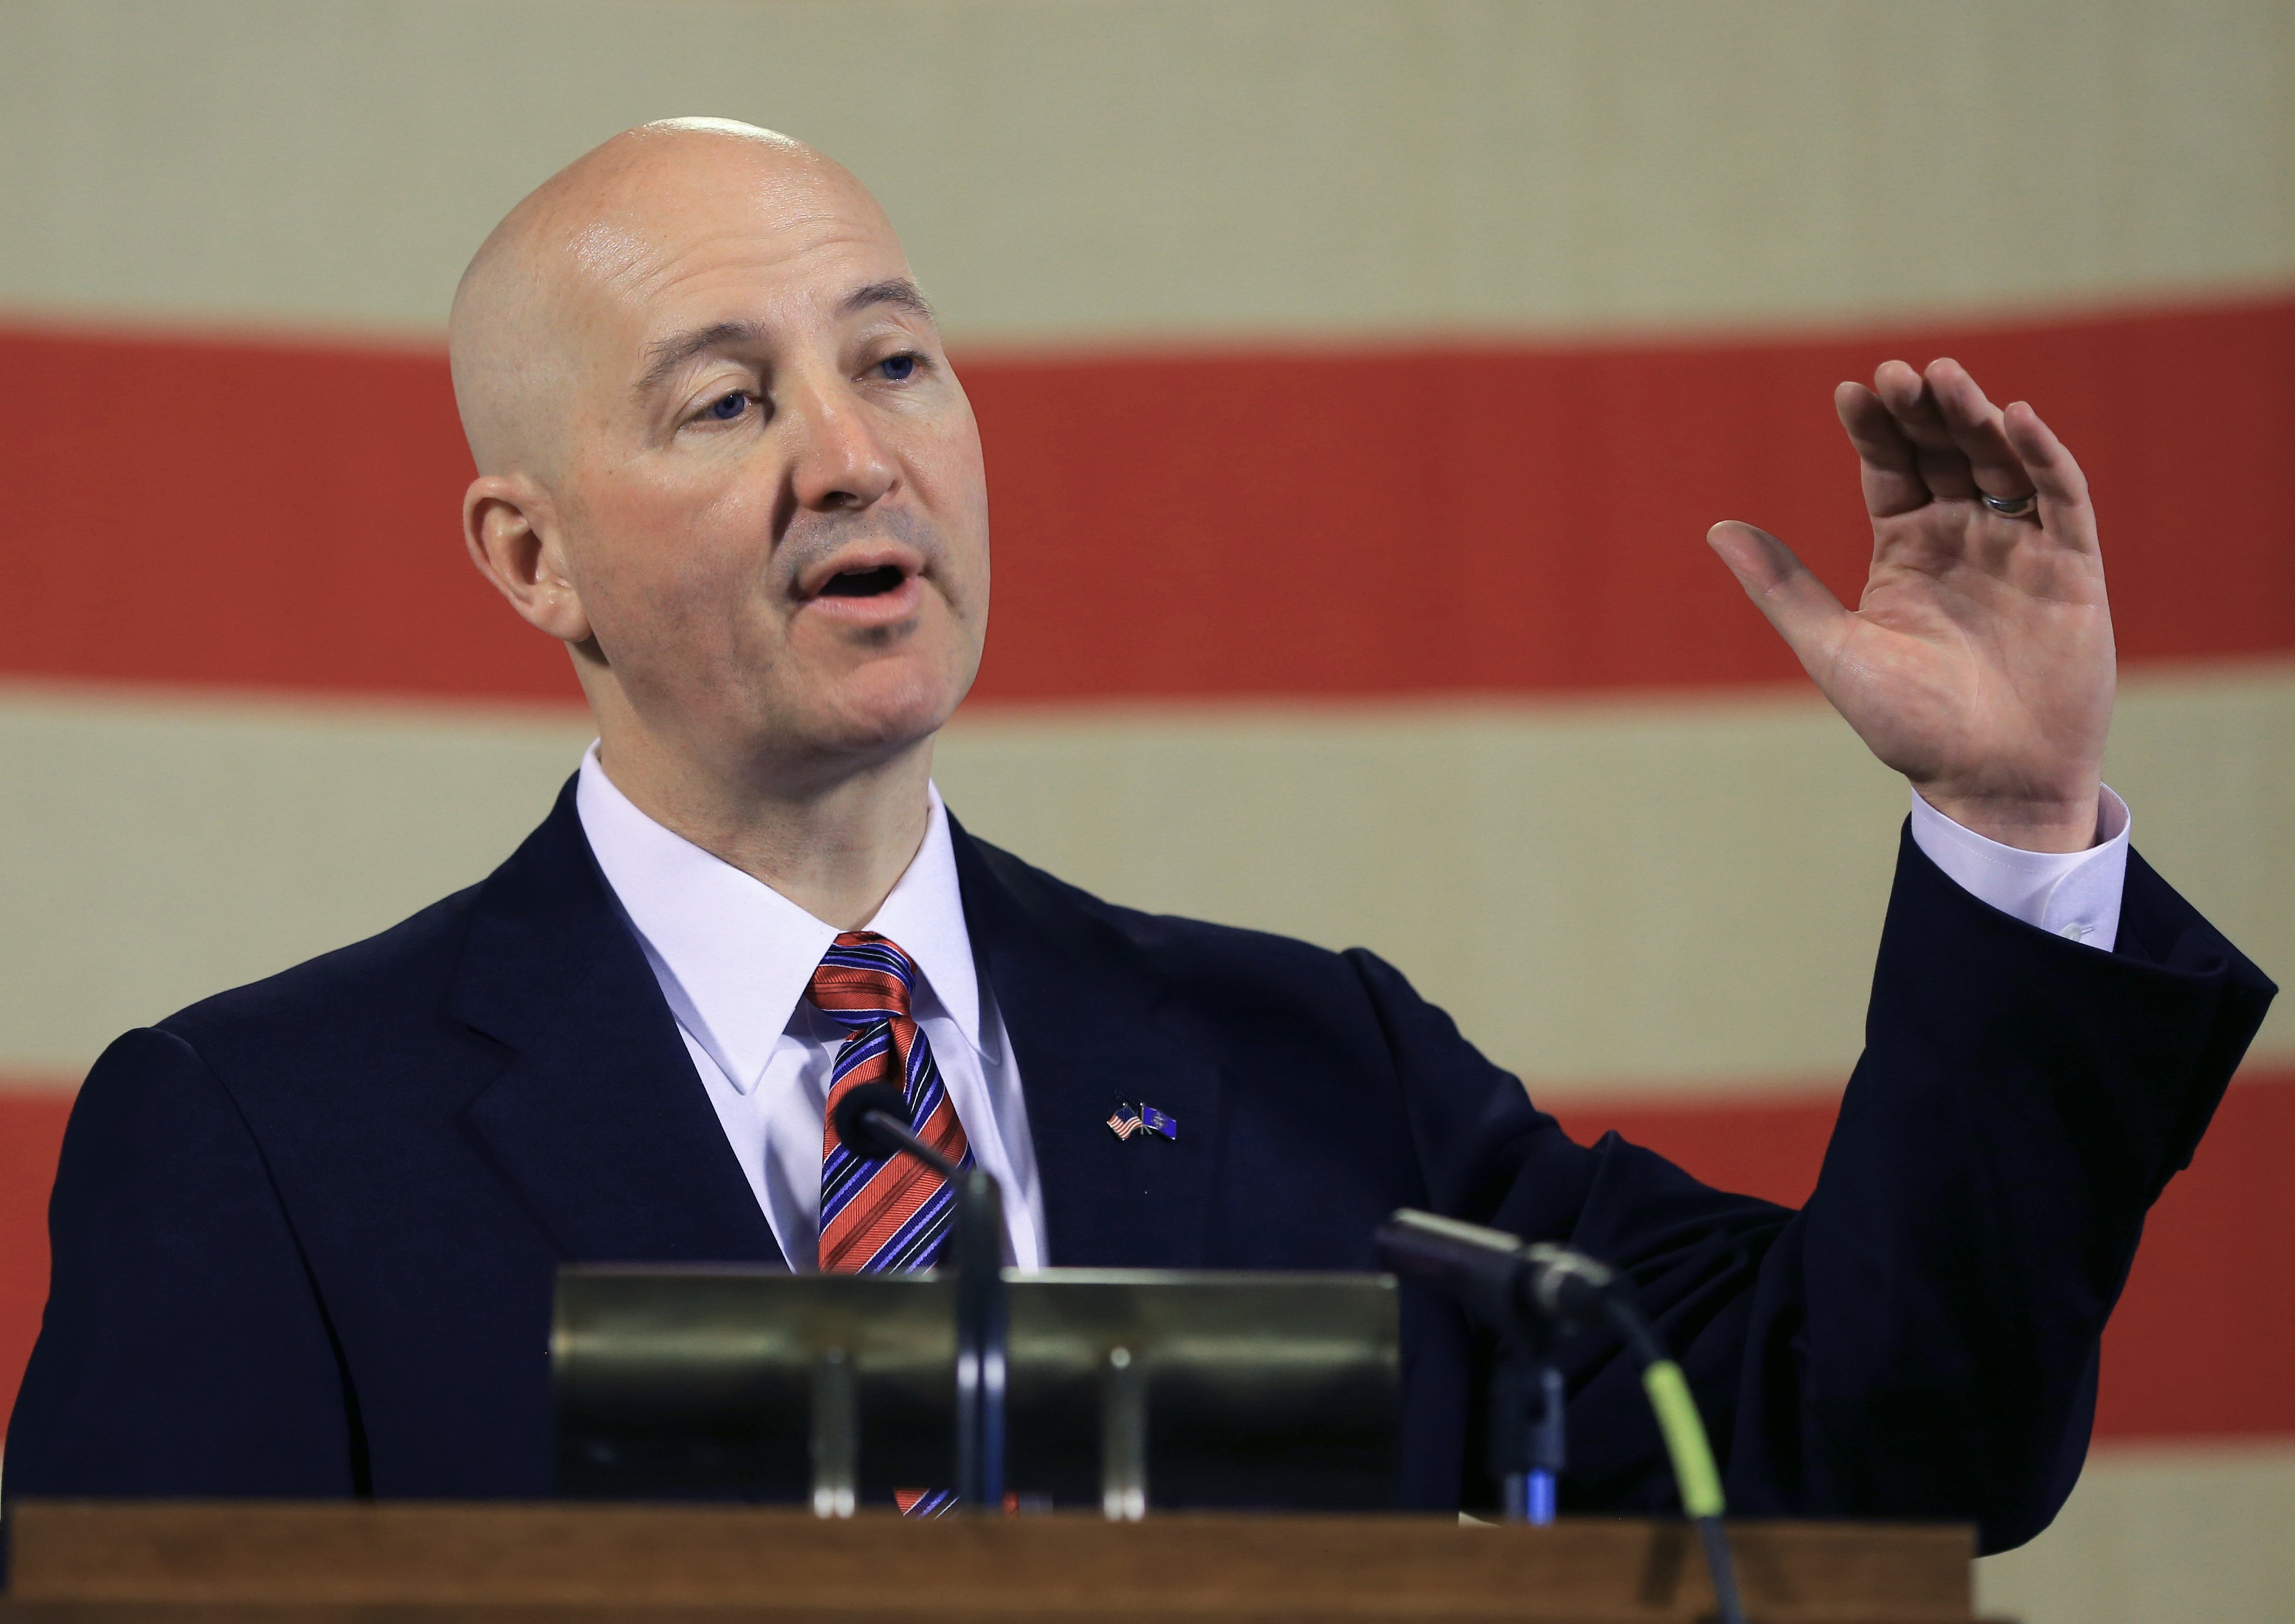 Neb. Gov. Pete Ricketts gestures during a news conference in Lincoln, Neb. on May 20, 2015.